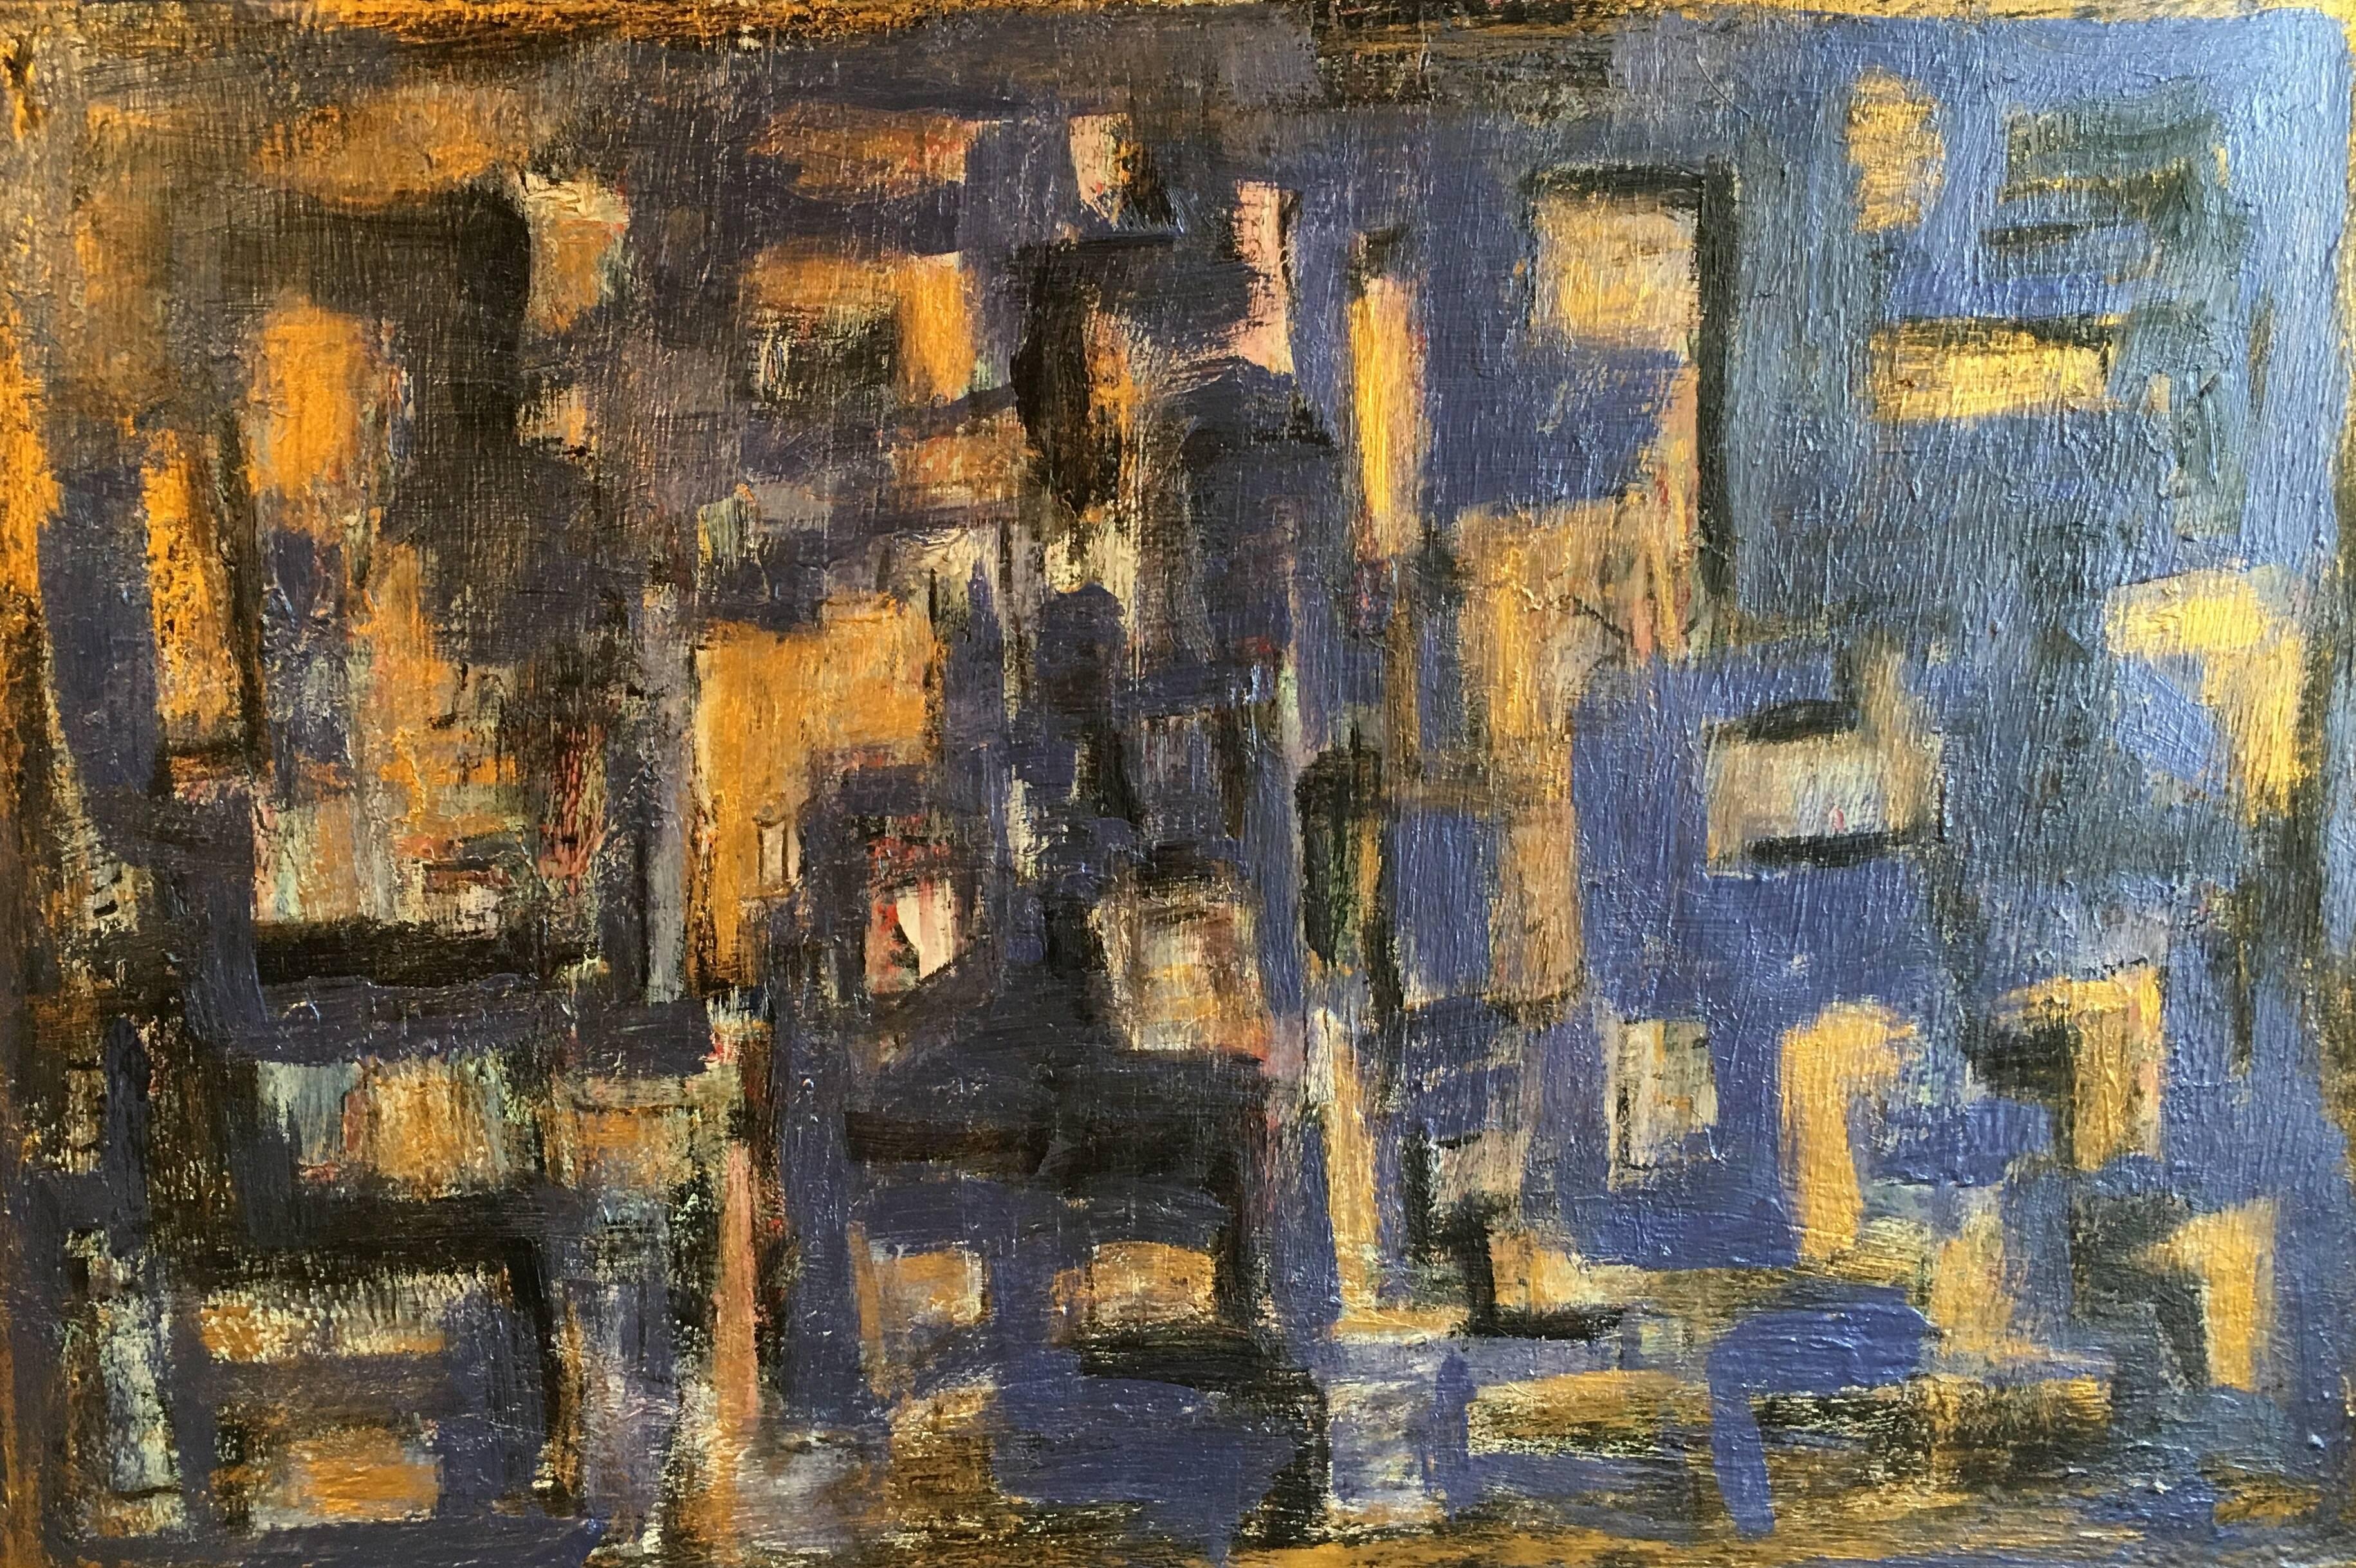 Unknown Interior Painting - Abstract Oil Painting, Blue and Gold Colour